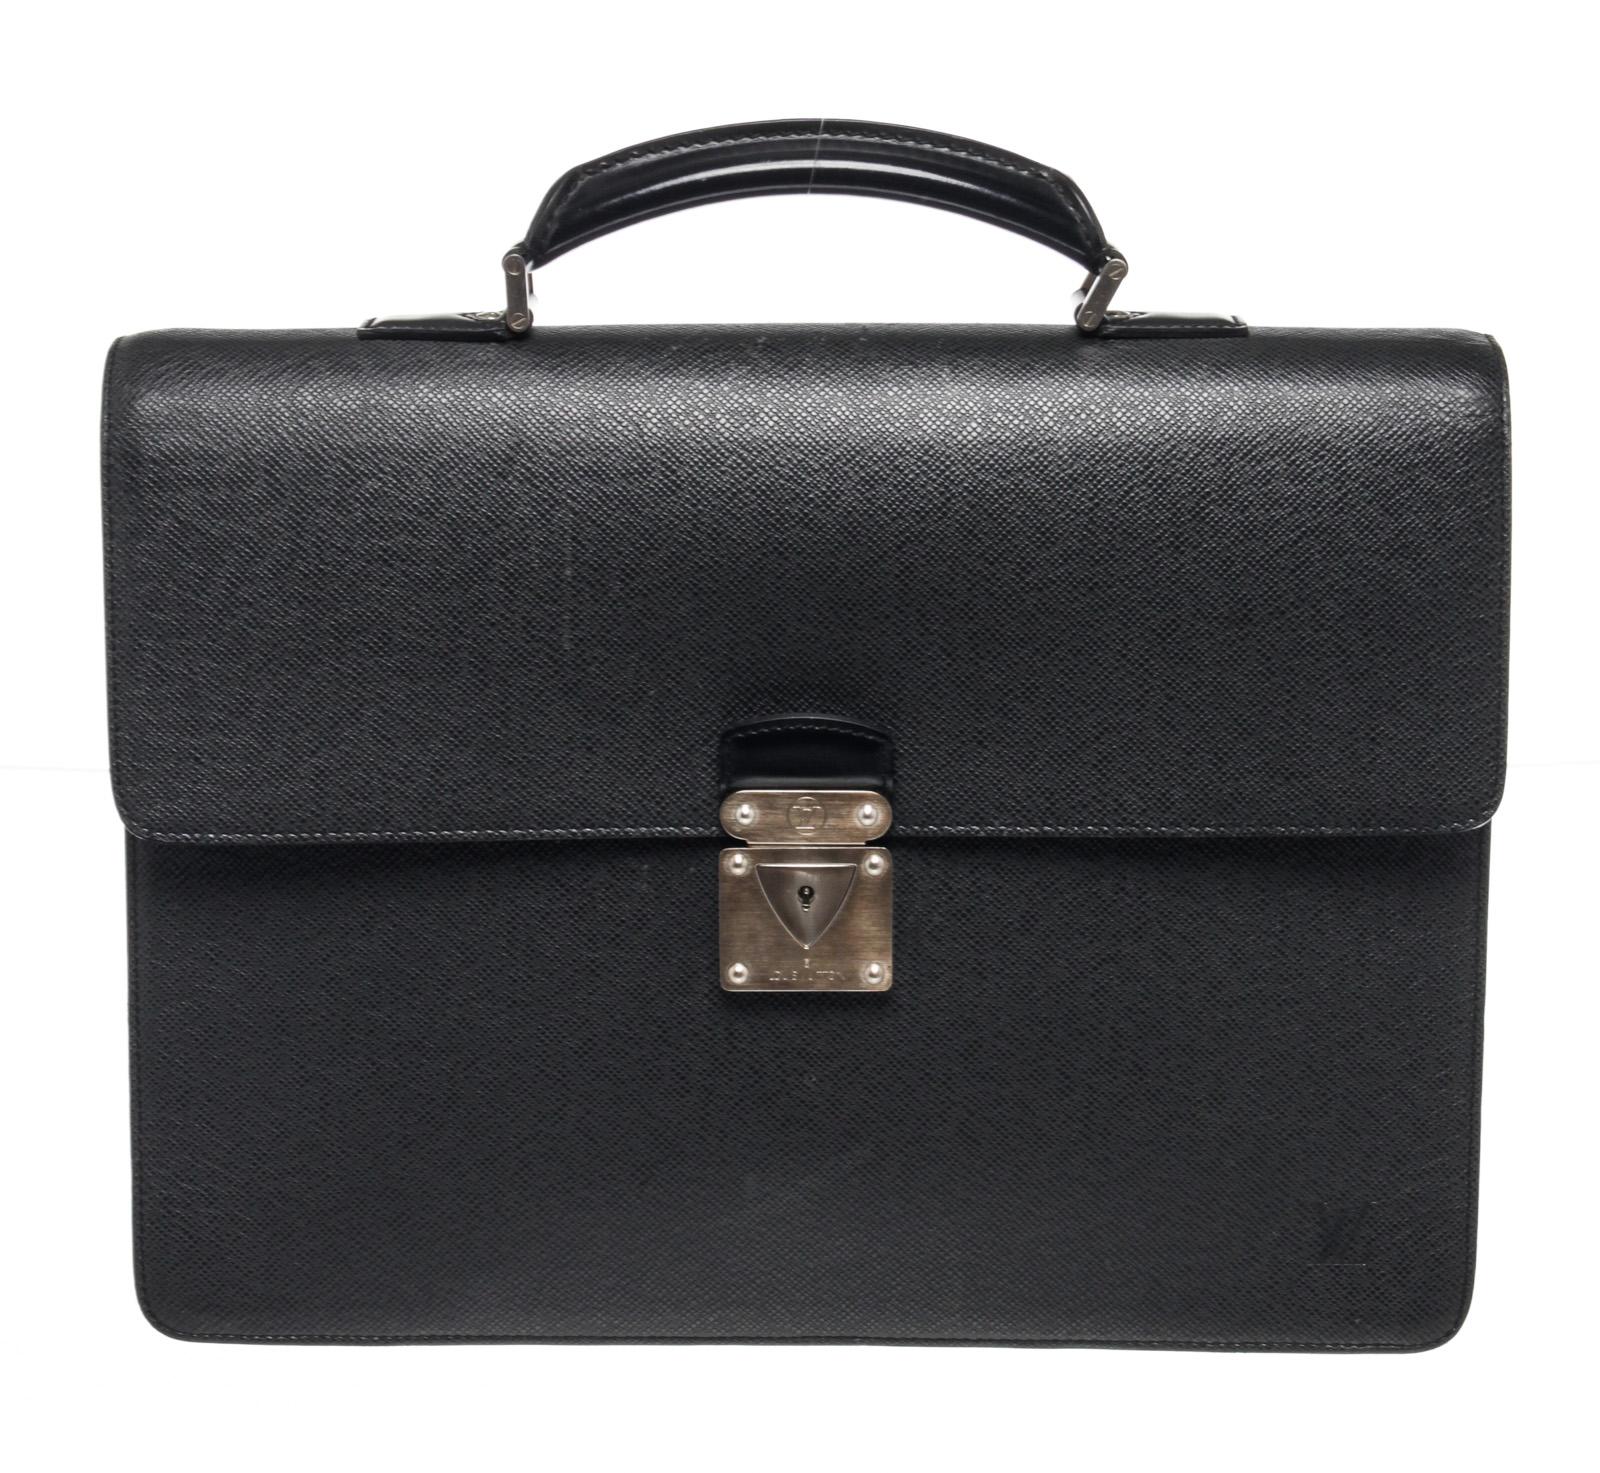 Louis Vuitton Black Leather Moskova Briefcase Bag In Good Condition For Sale In Irvine, CA